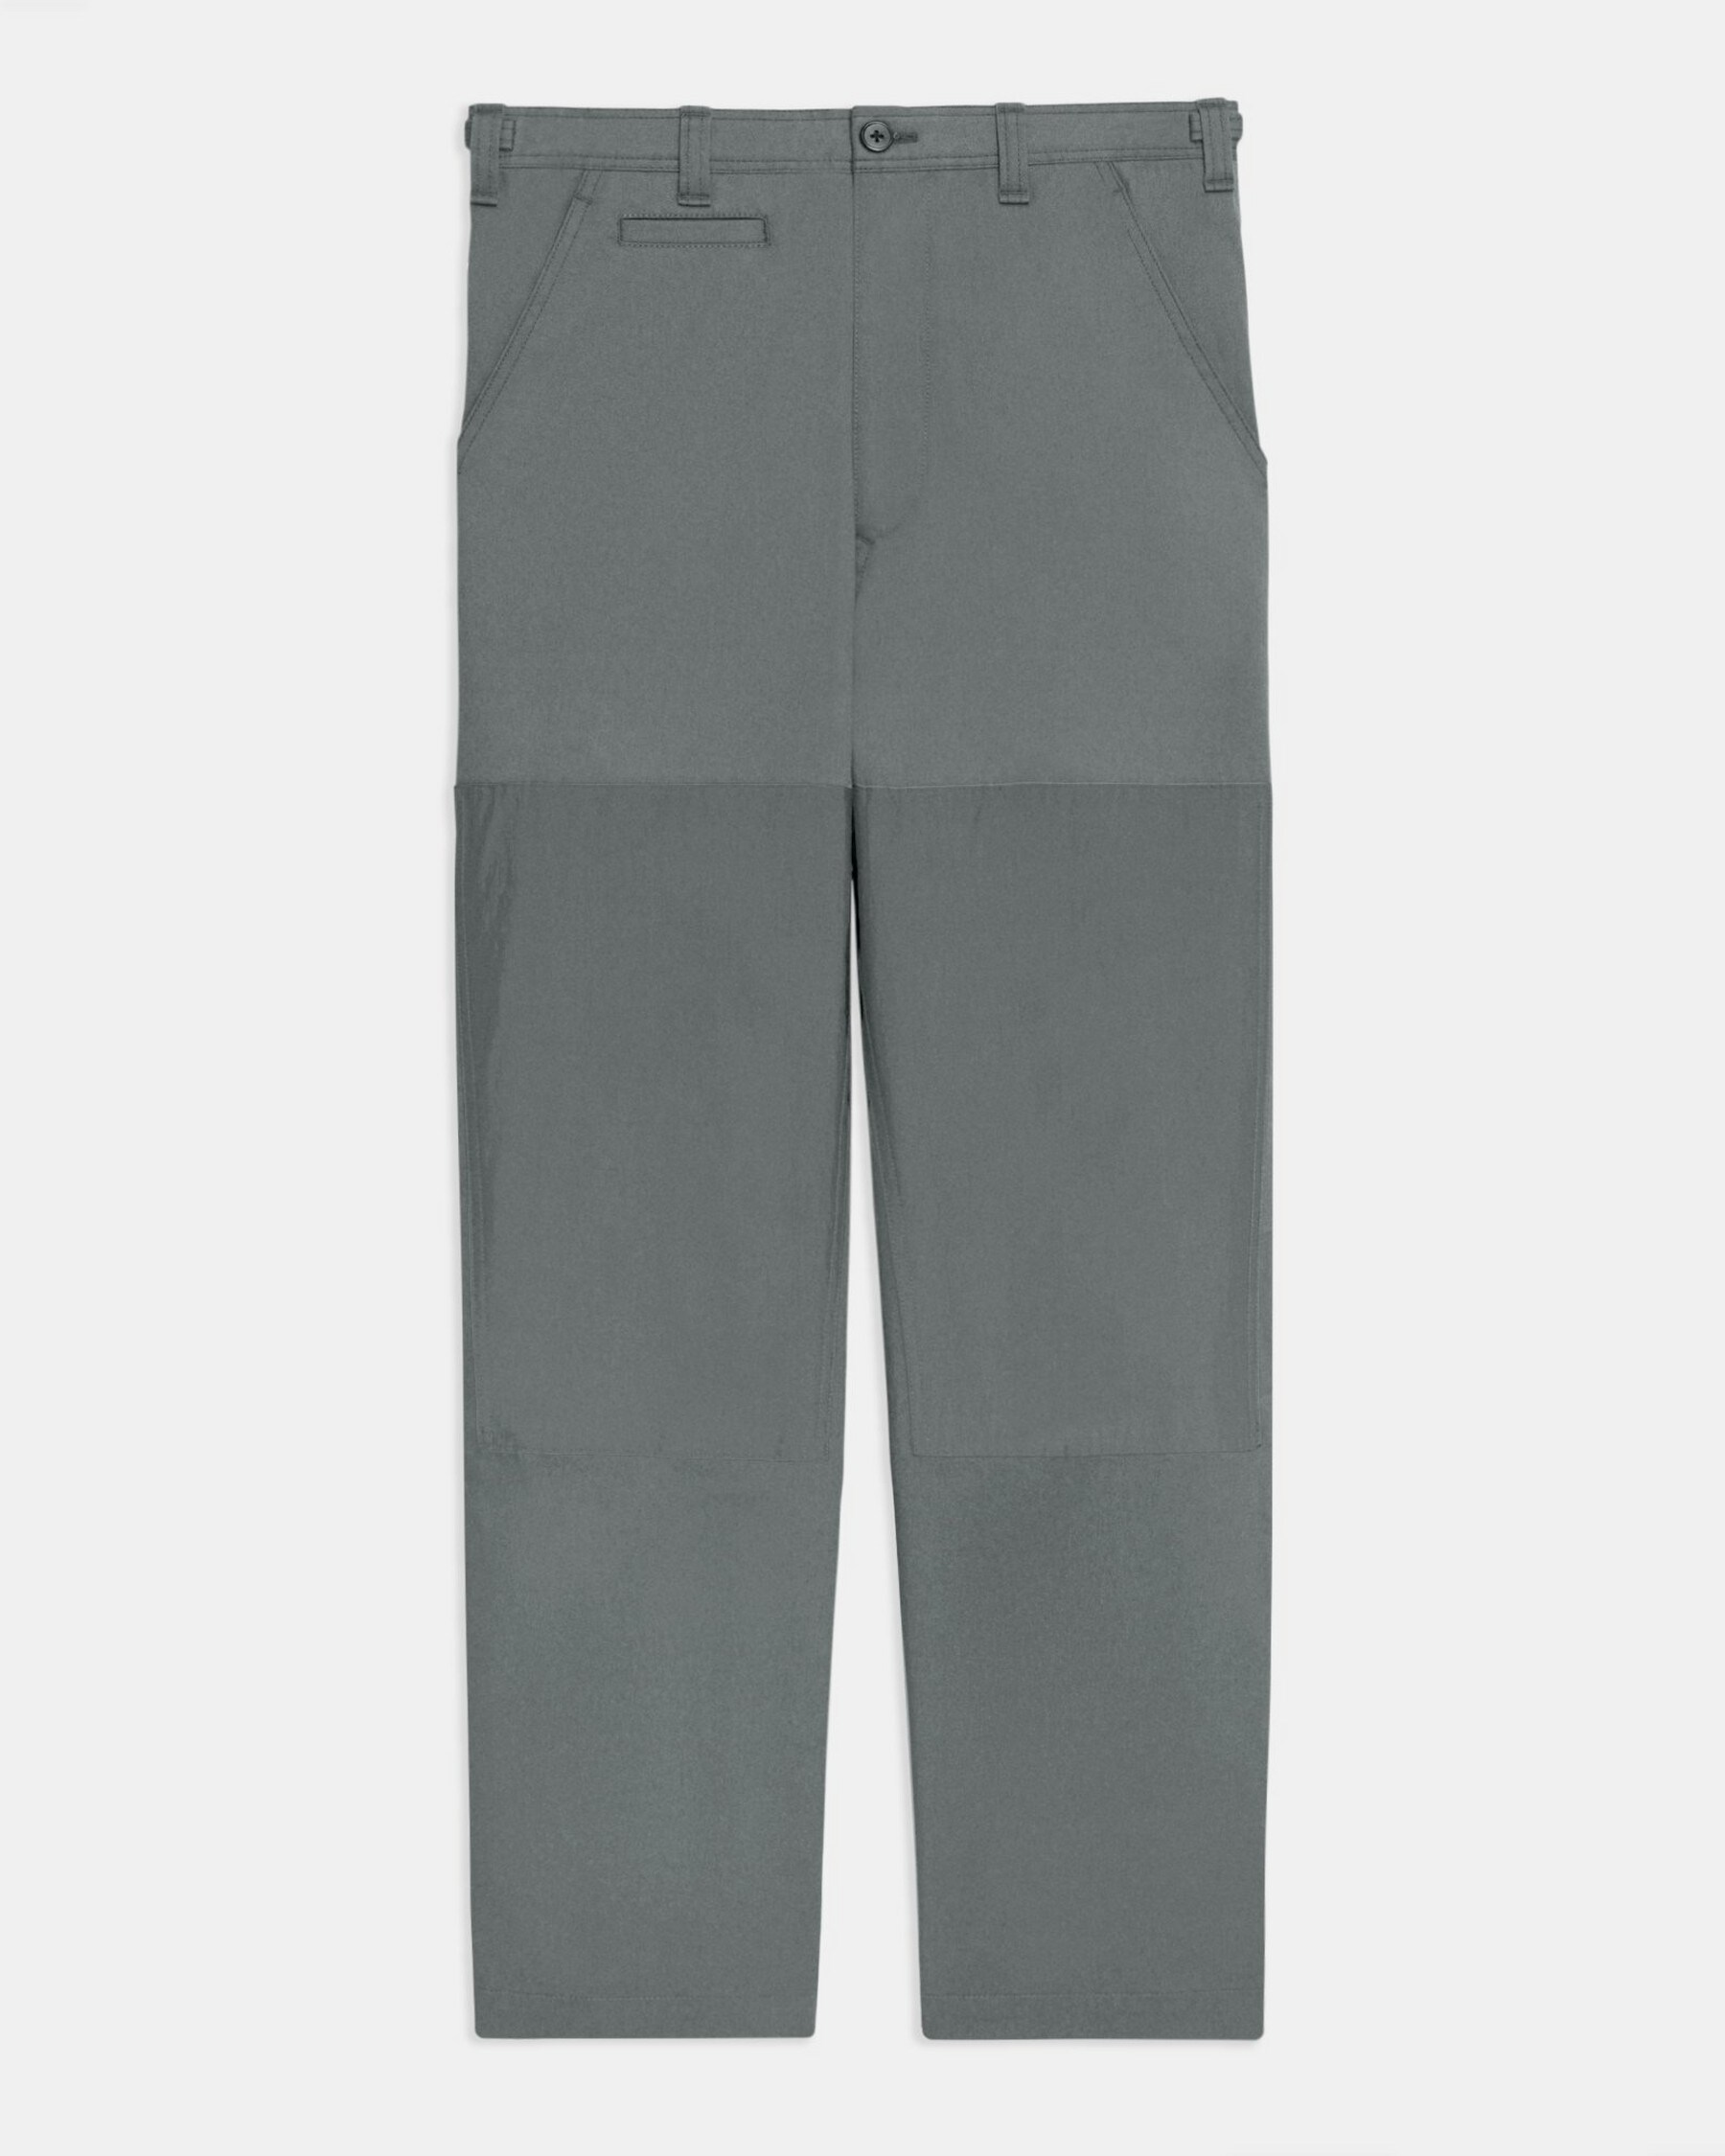 Wide-Leg Pant in Cotton Twill